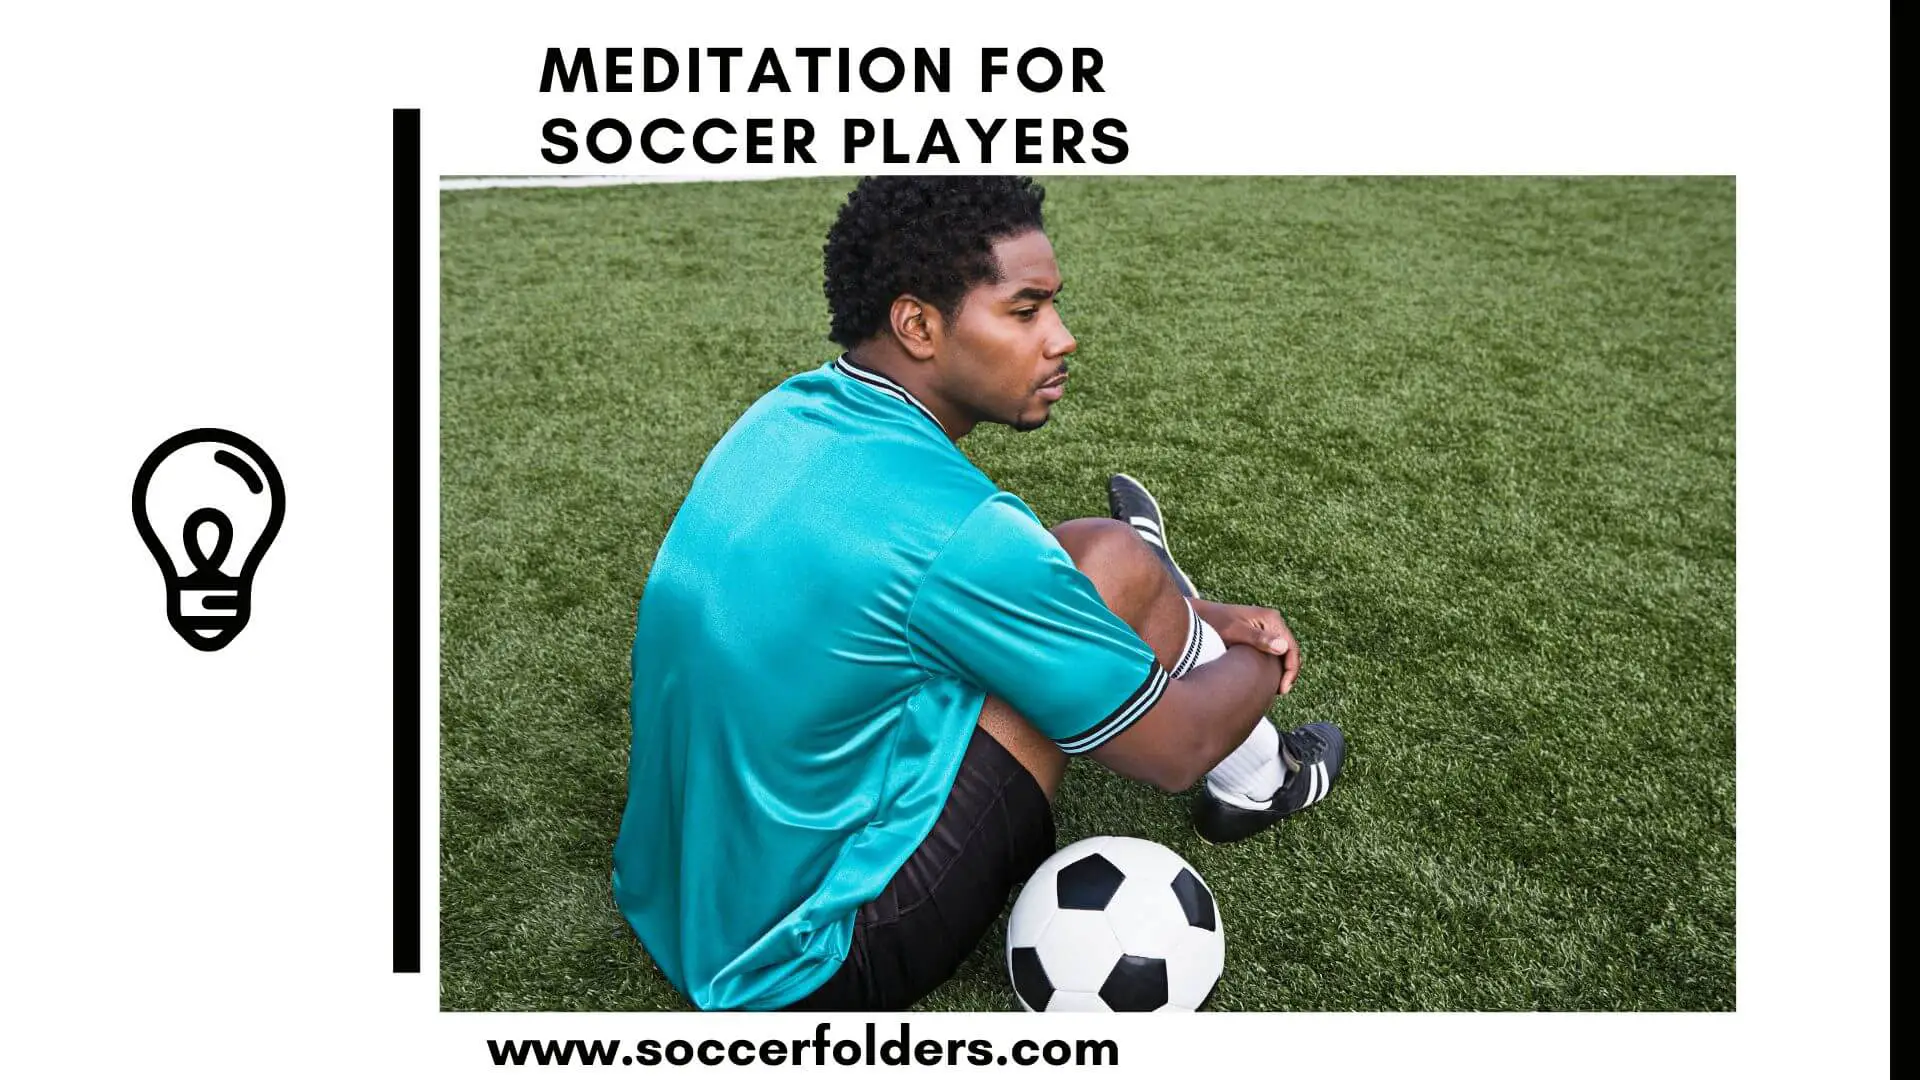 Meditation for soccer players - Featured Image